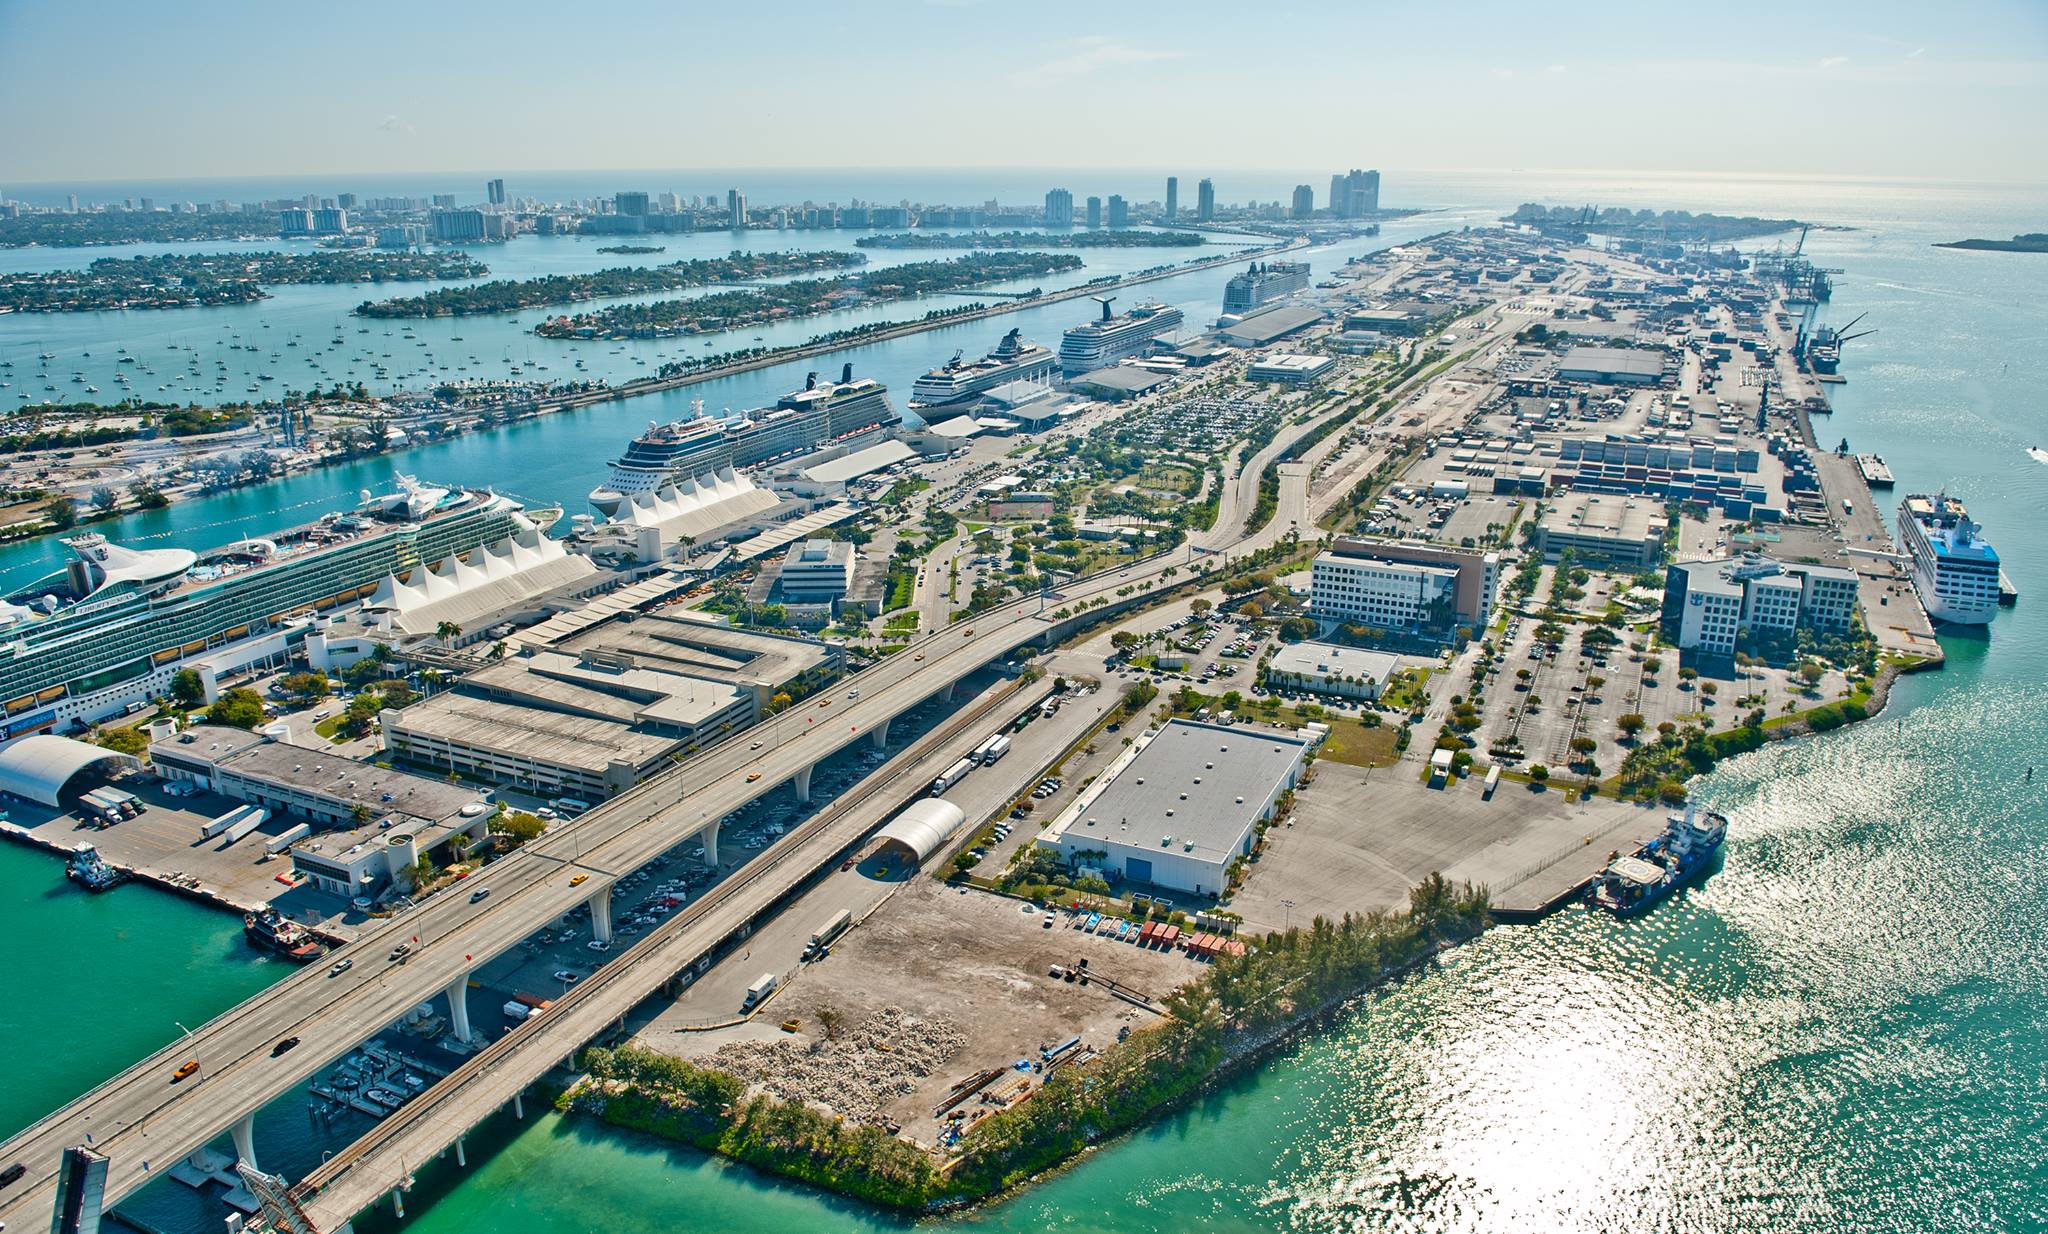 PortMiami wants to broker a deal for shared cruise terminal between Royal Caribbean and MSC | Royal Caribbean Blog